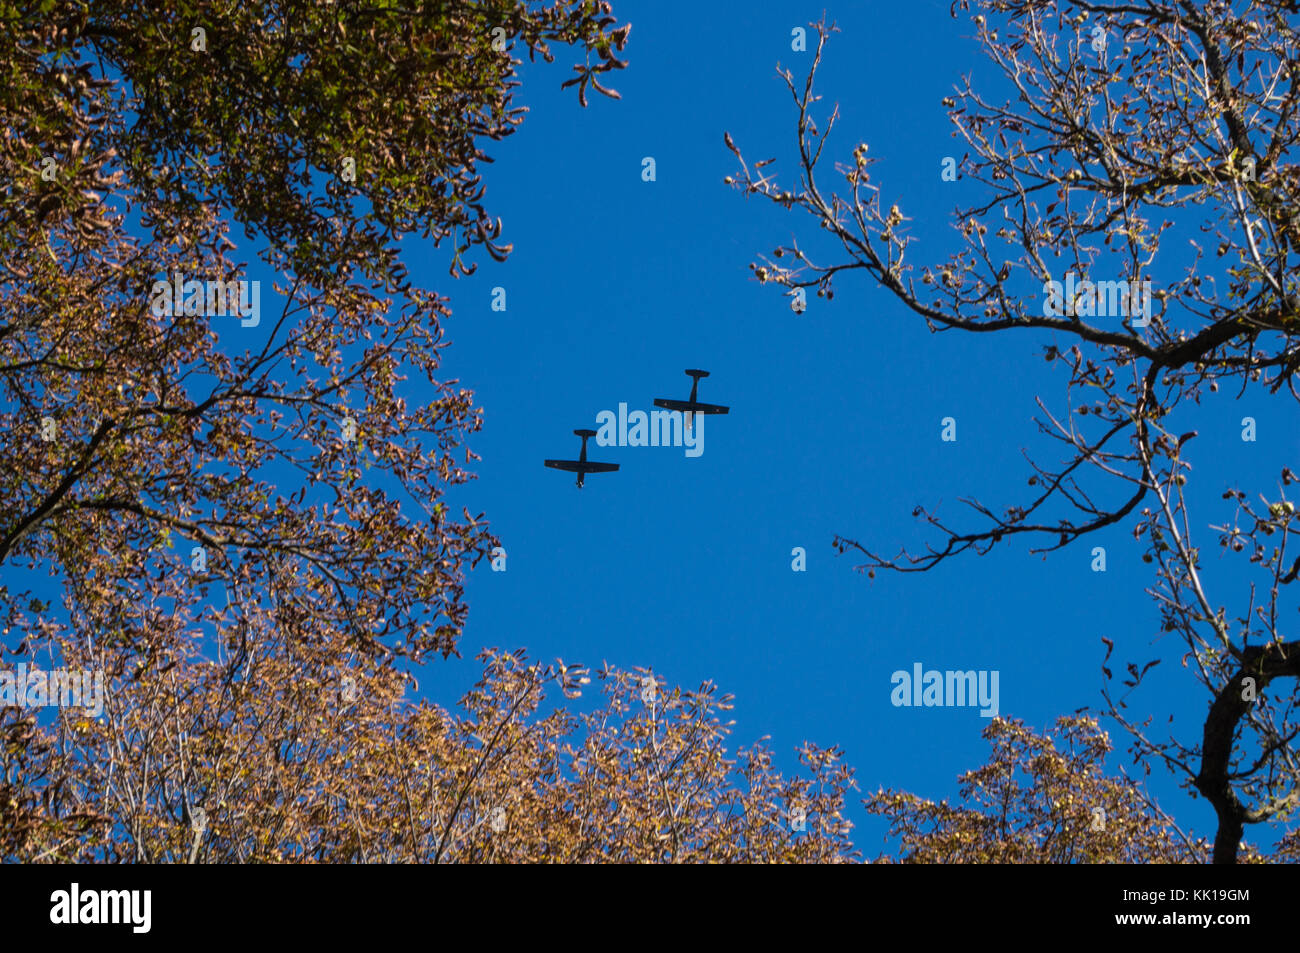 Fohnsdorf, Austria - 05.10.2017: Two training aircraft of the Austrian air force framed by trees Stock Photo